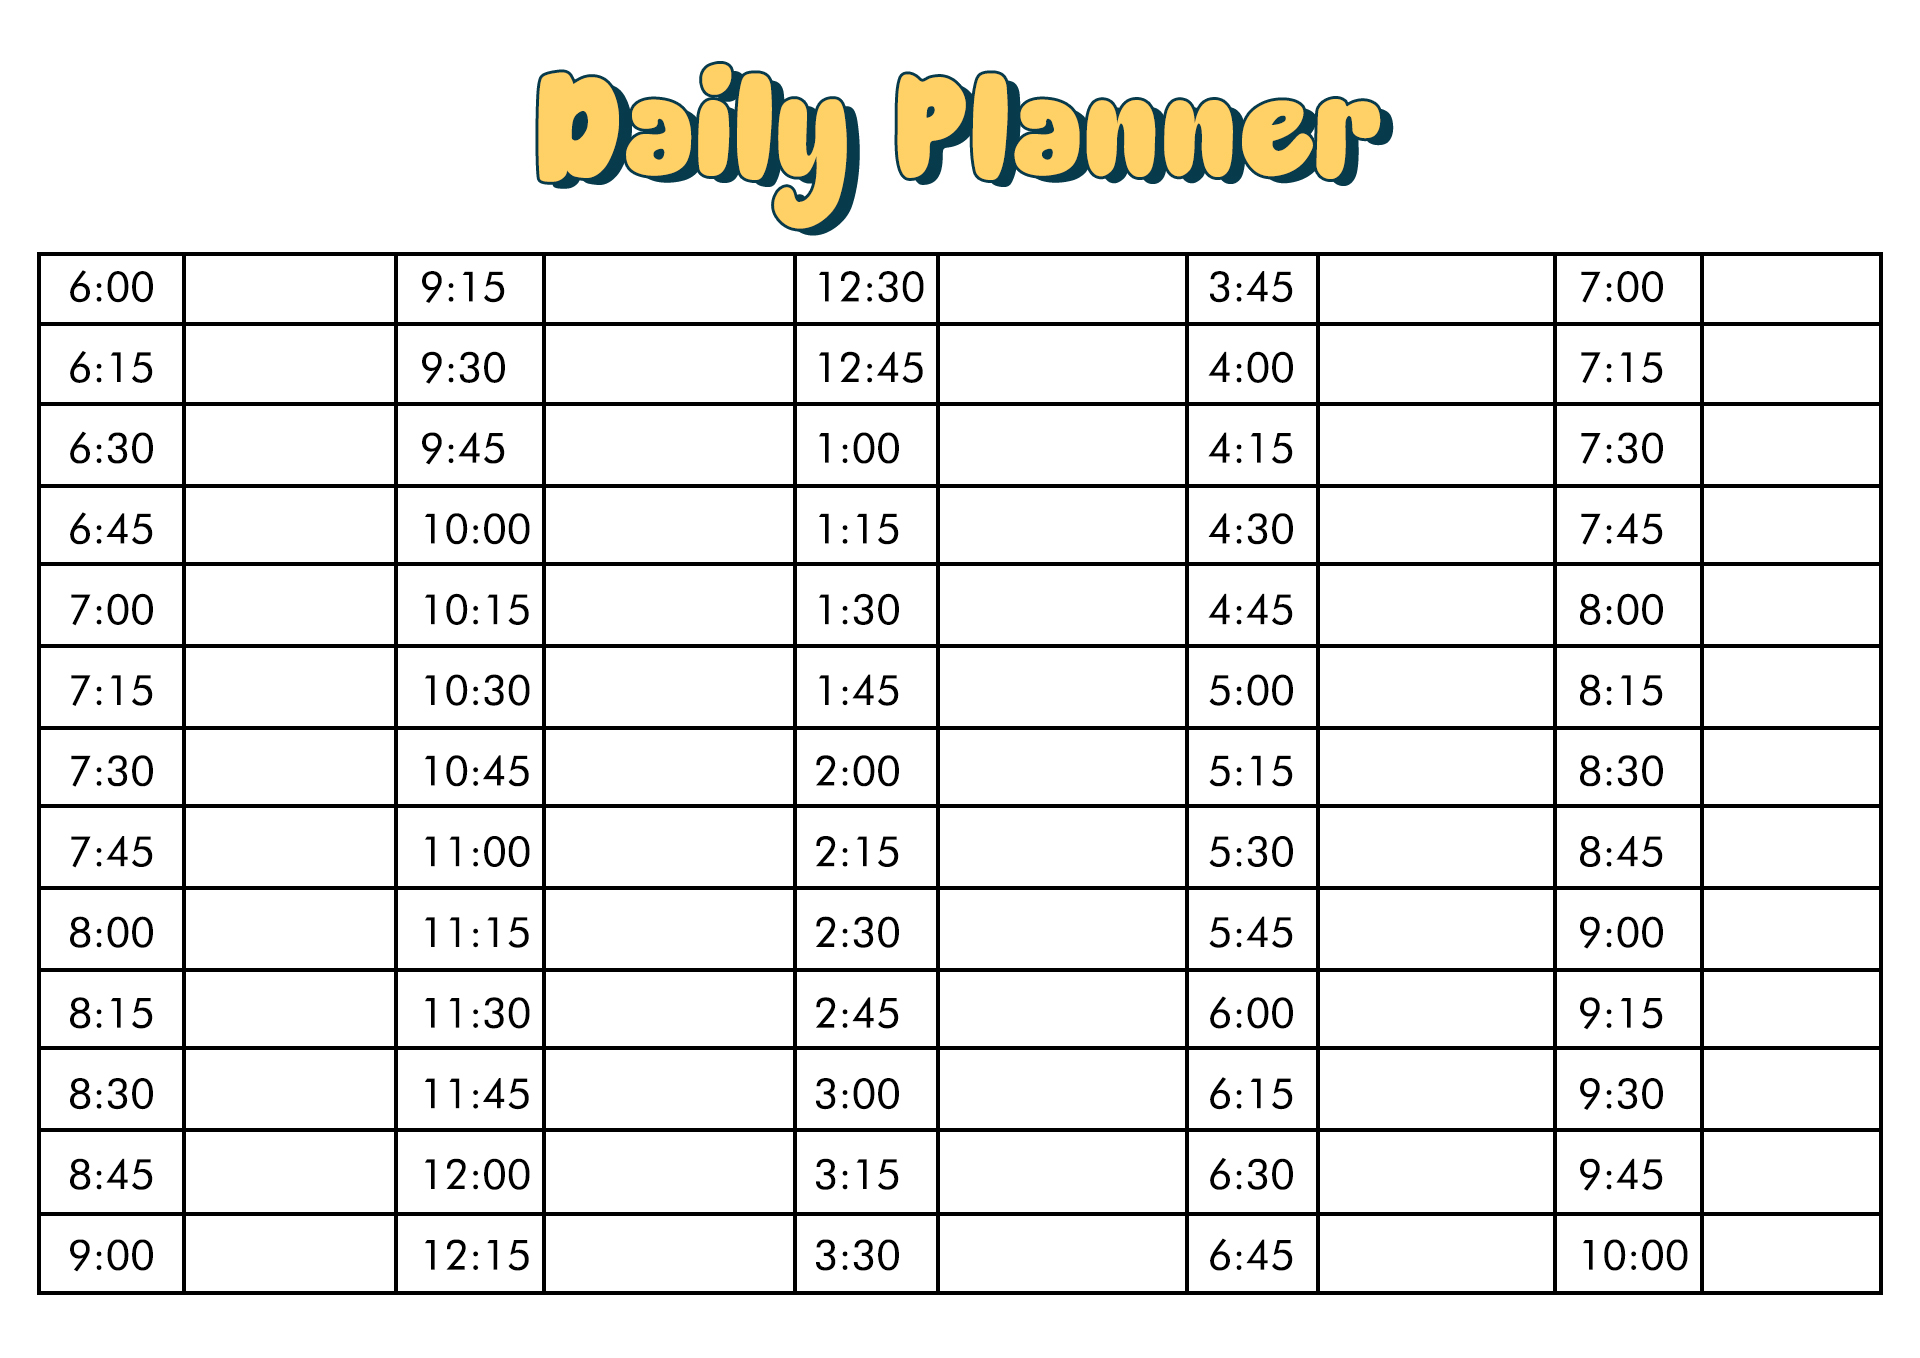 daily-calendar-template-excel-appointment-schedule-template-15-minute